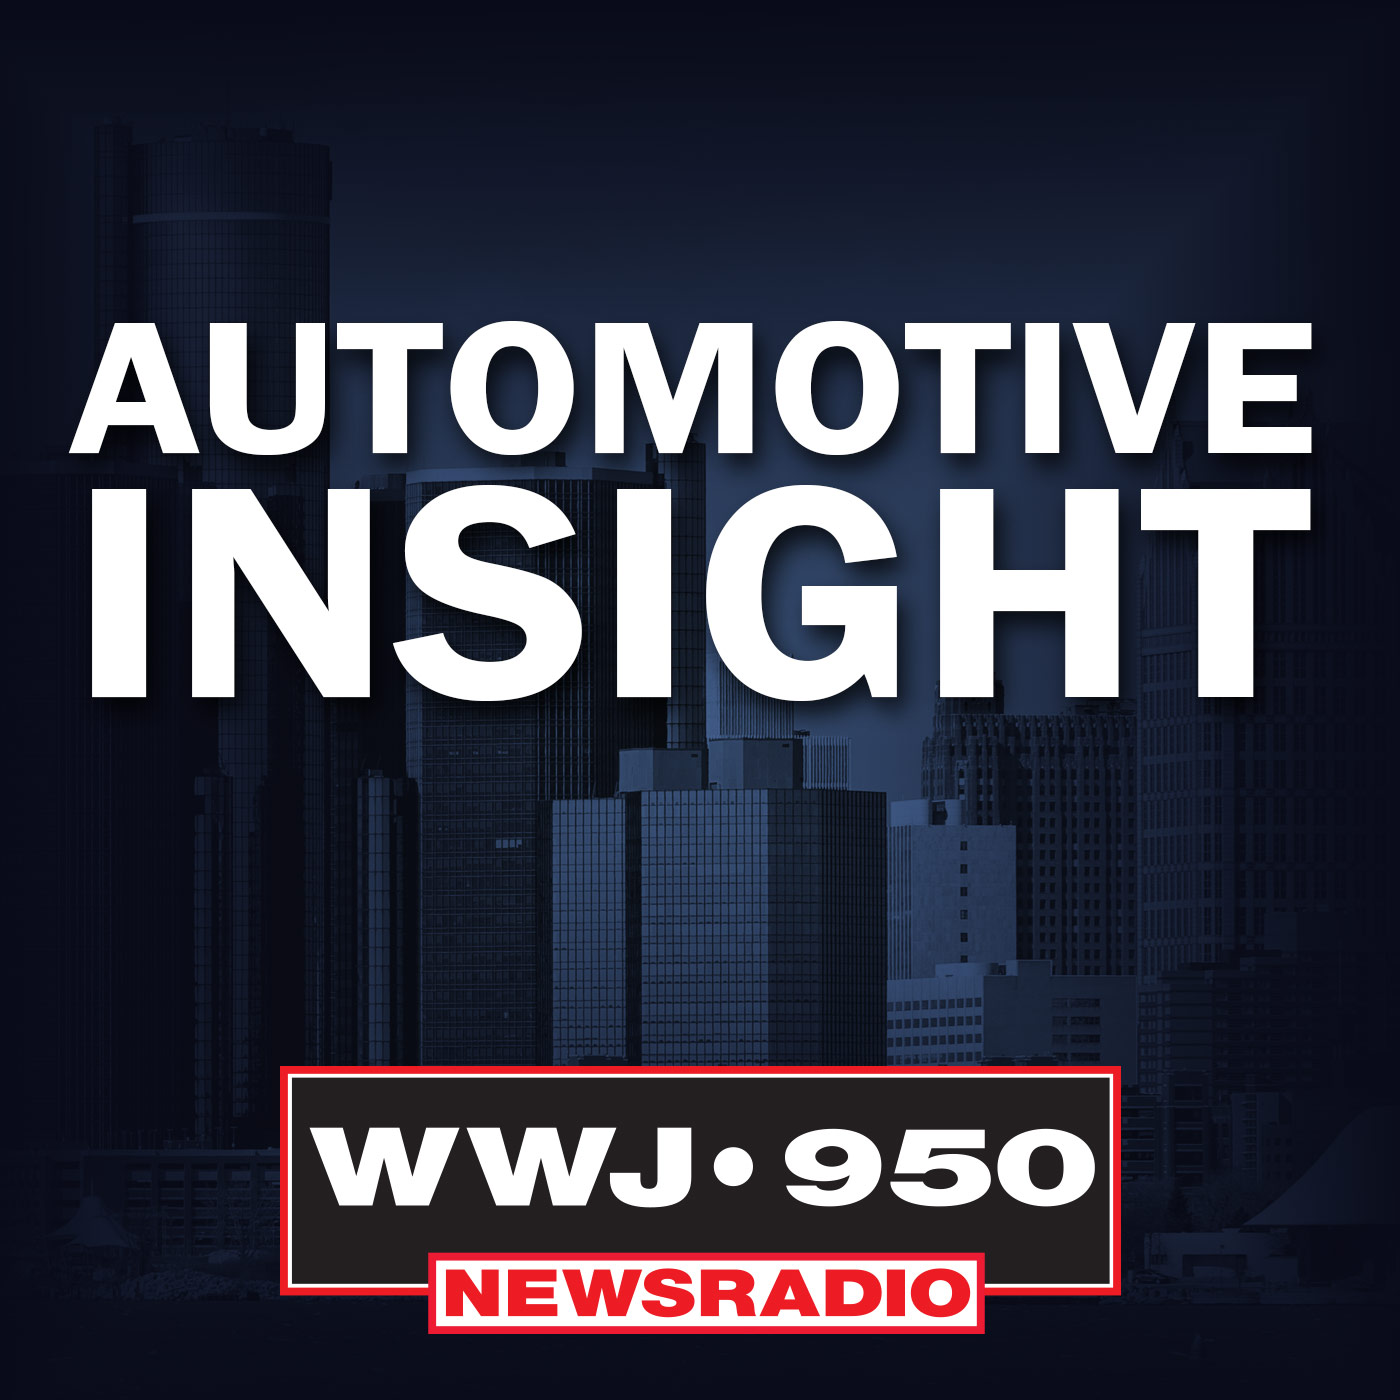 Automotive Insight - Don't look like an idiot